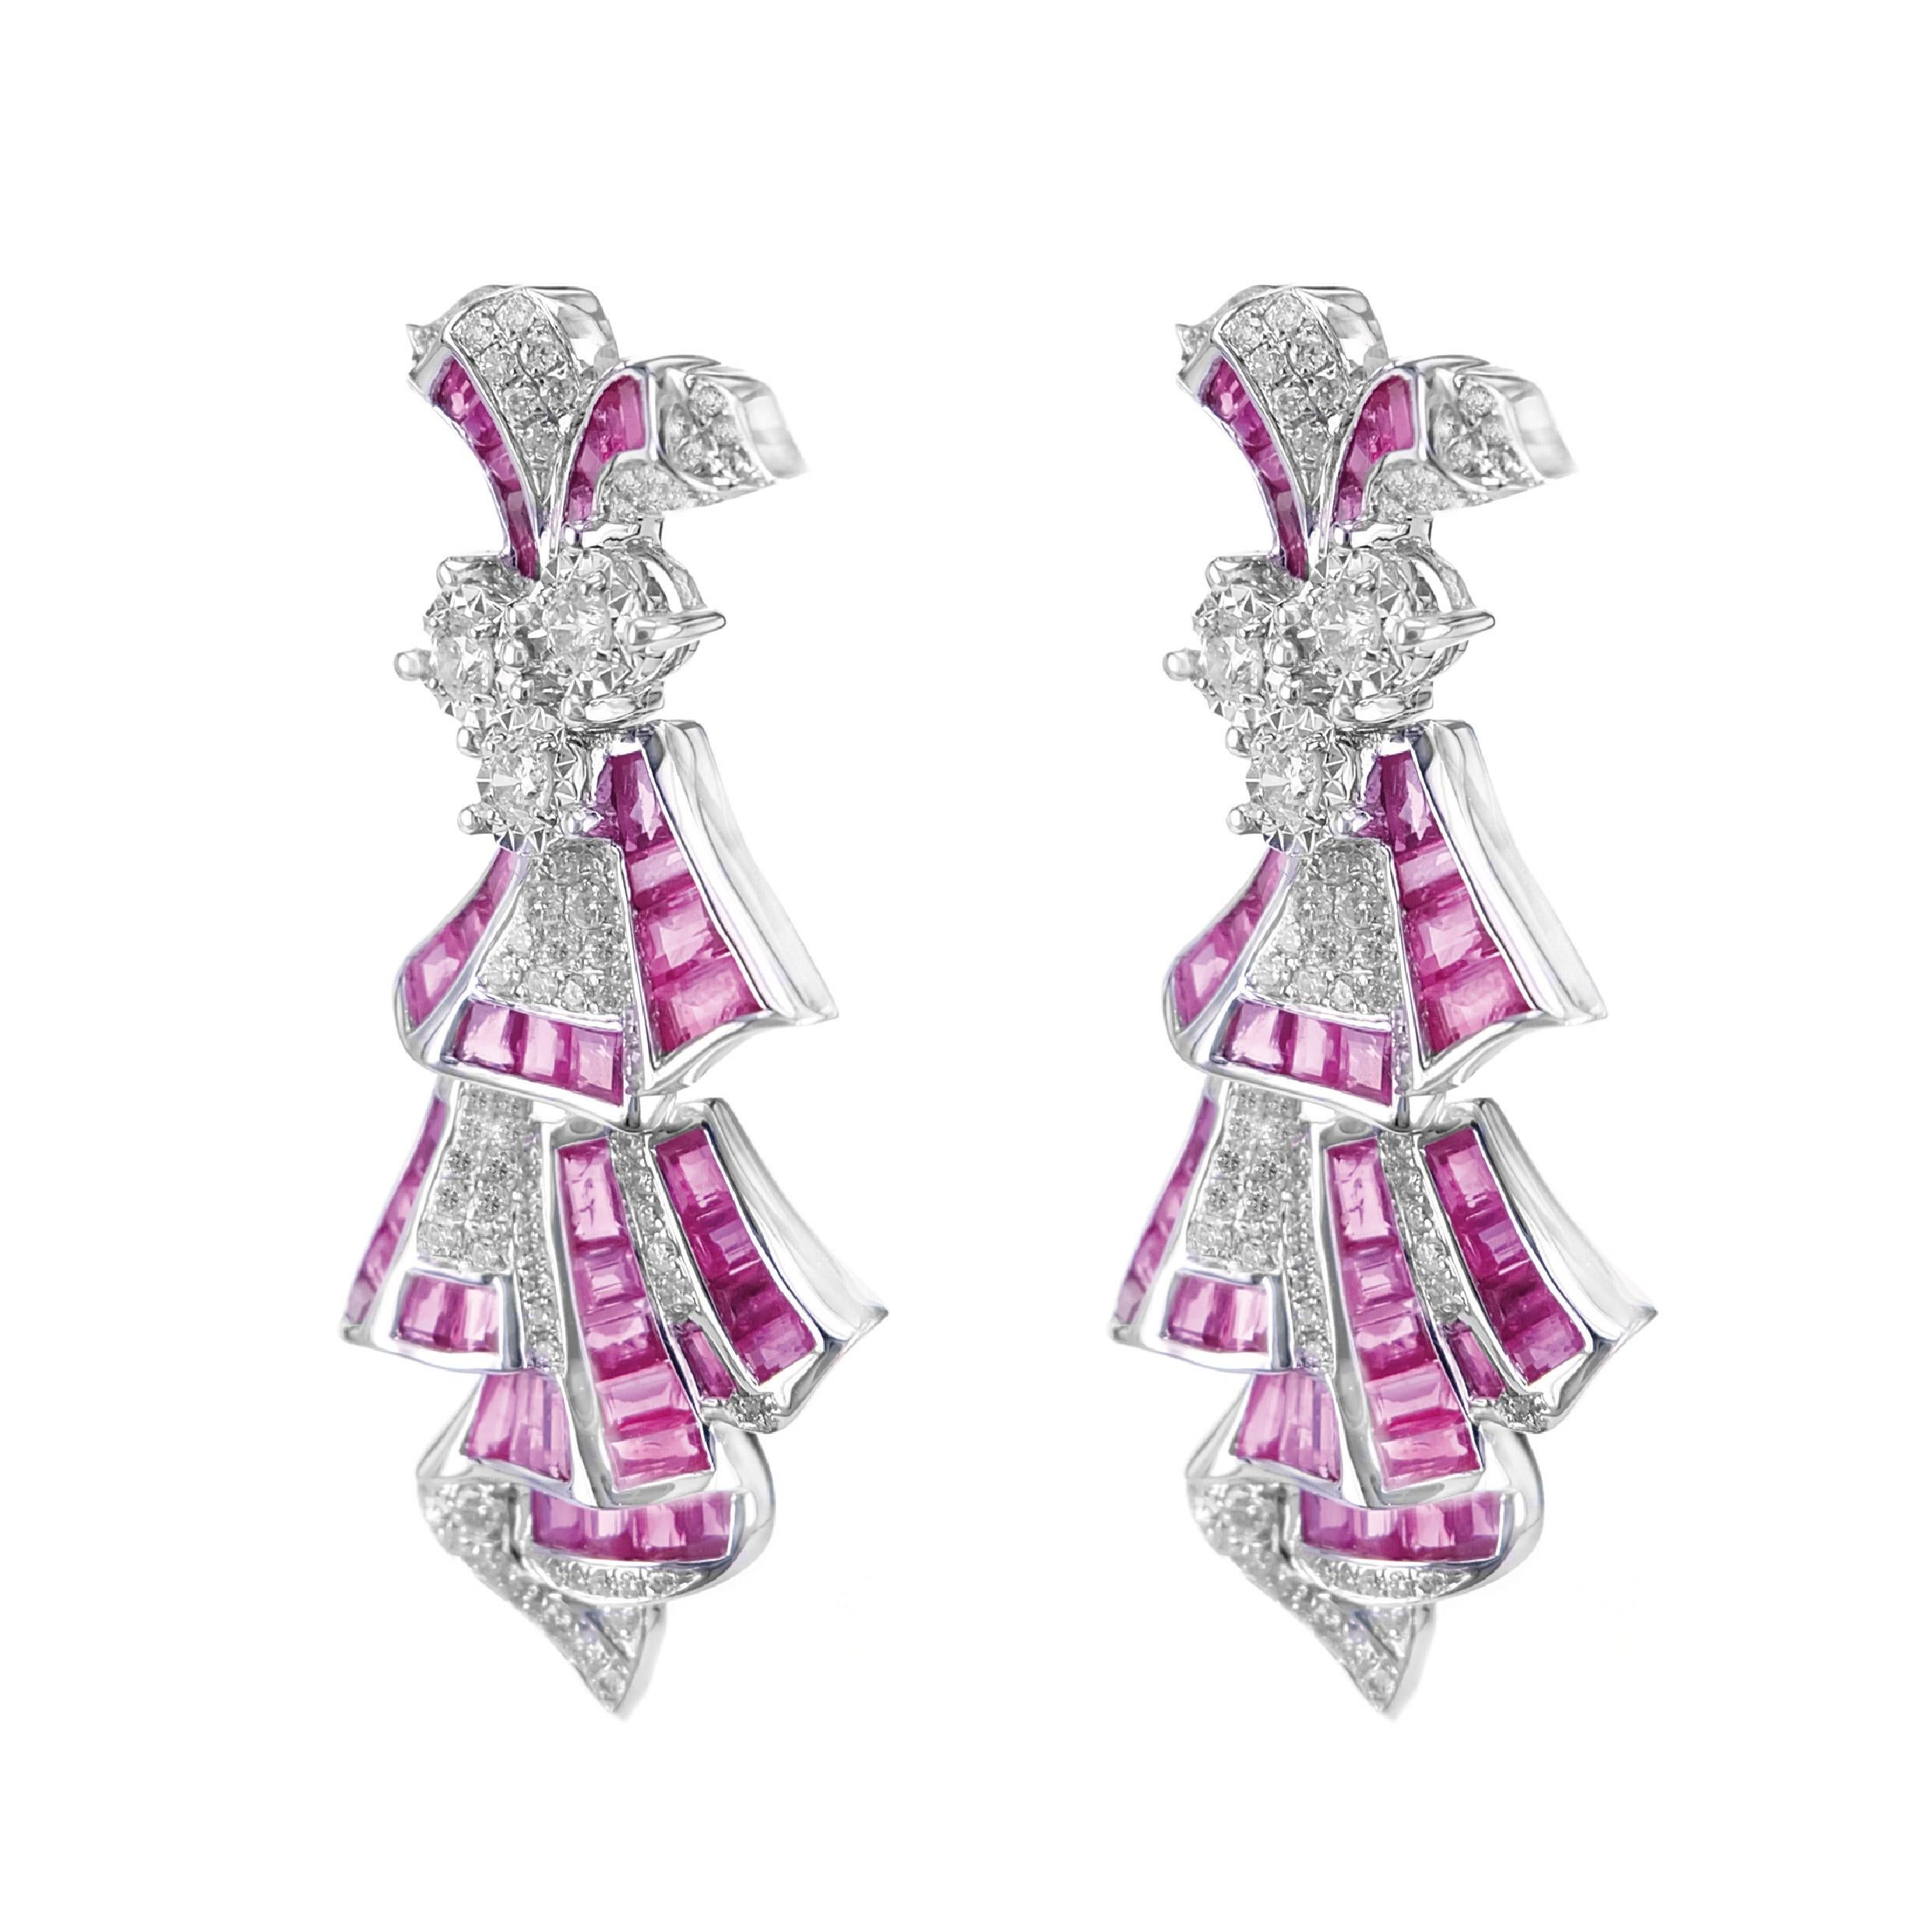 Inspired by a dancing doll, the movements of the earring resemble the poetic motion of a dancing doll. 6.73 carats of vivid red ruby and 1.14 carat of white round brilliant diamond are set in this dangle earring.
The details of the diamond are